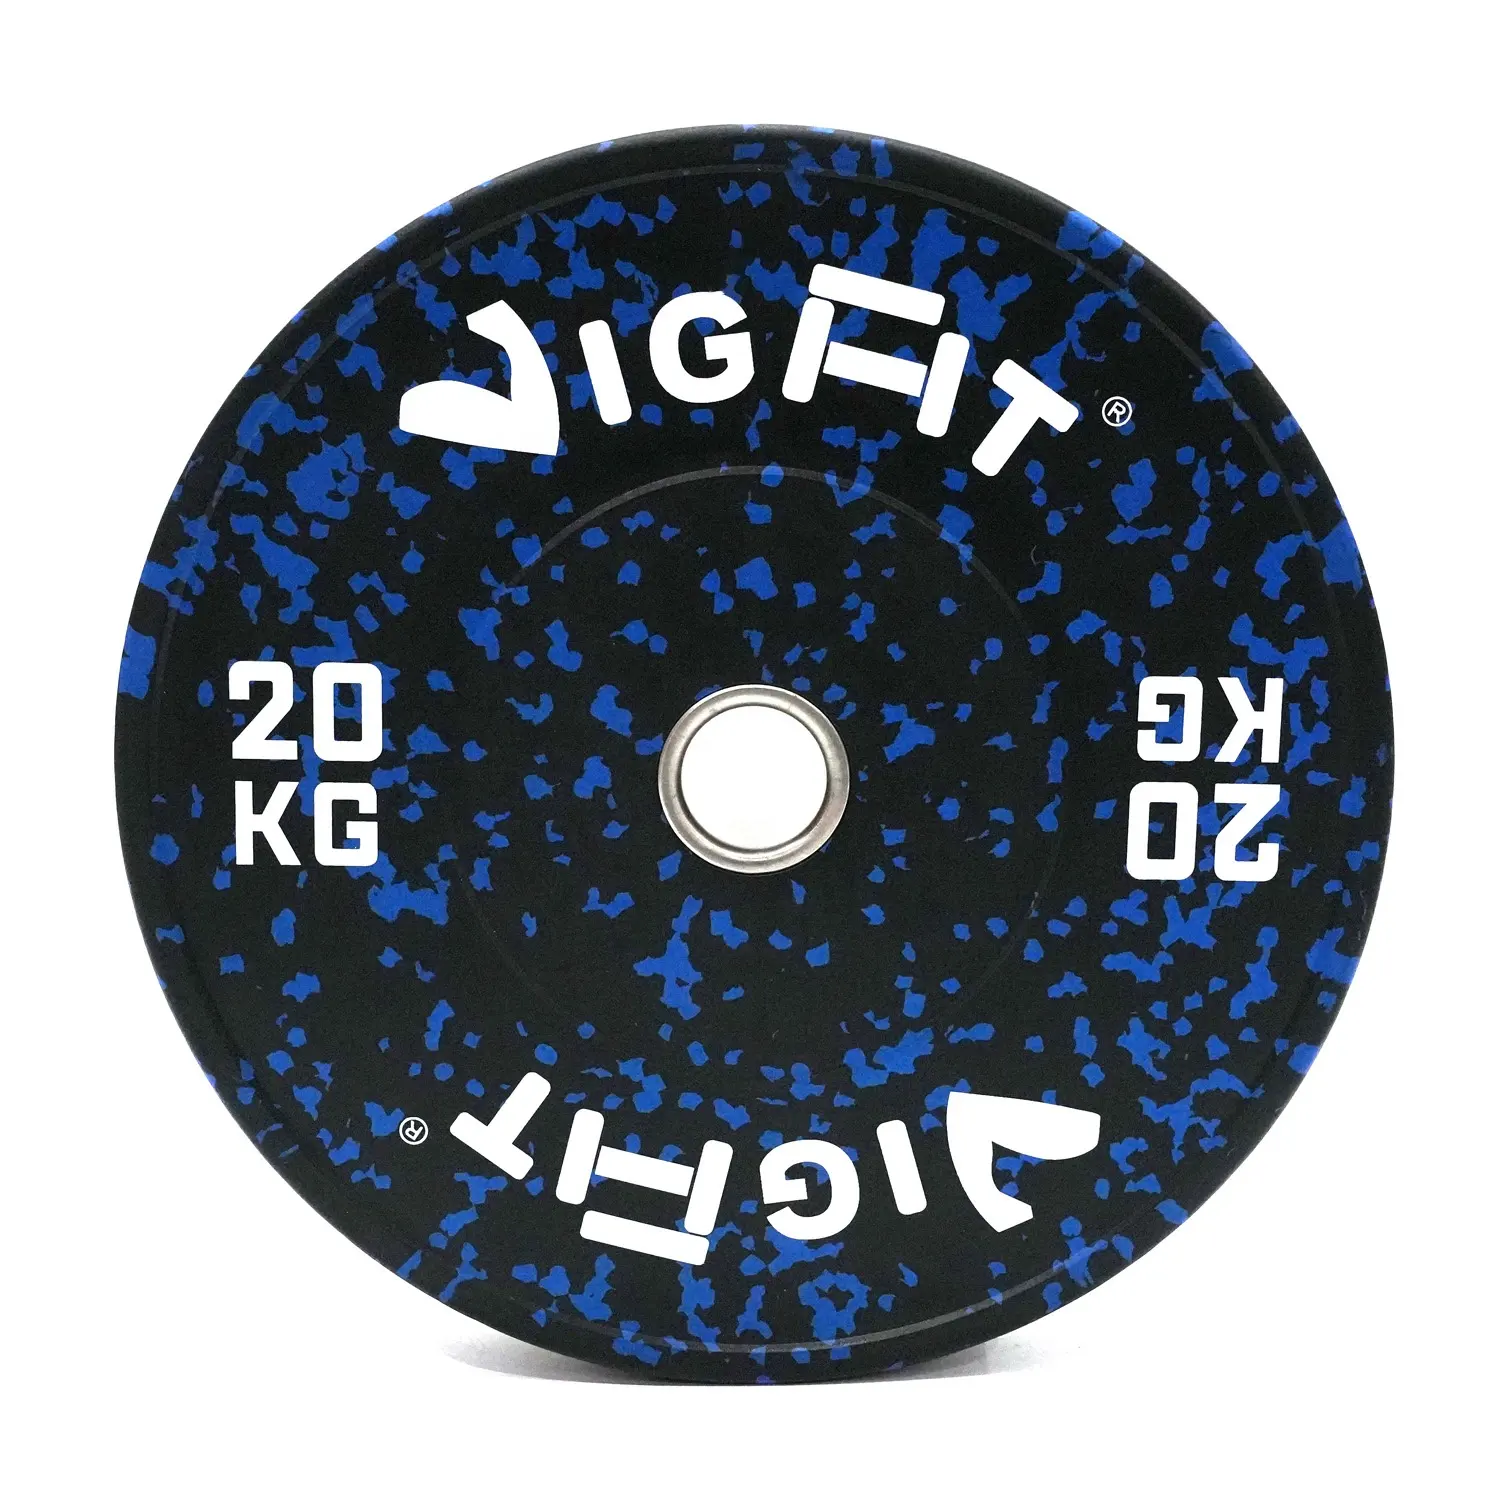 Colorful Rubber Weight Plate Barbell Bumper Plates For Weight Lifting With Stainless Steel Center